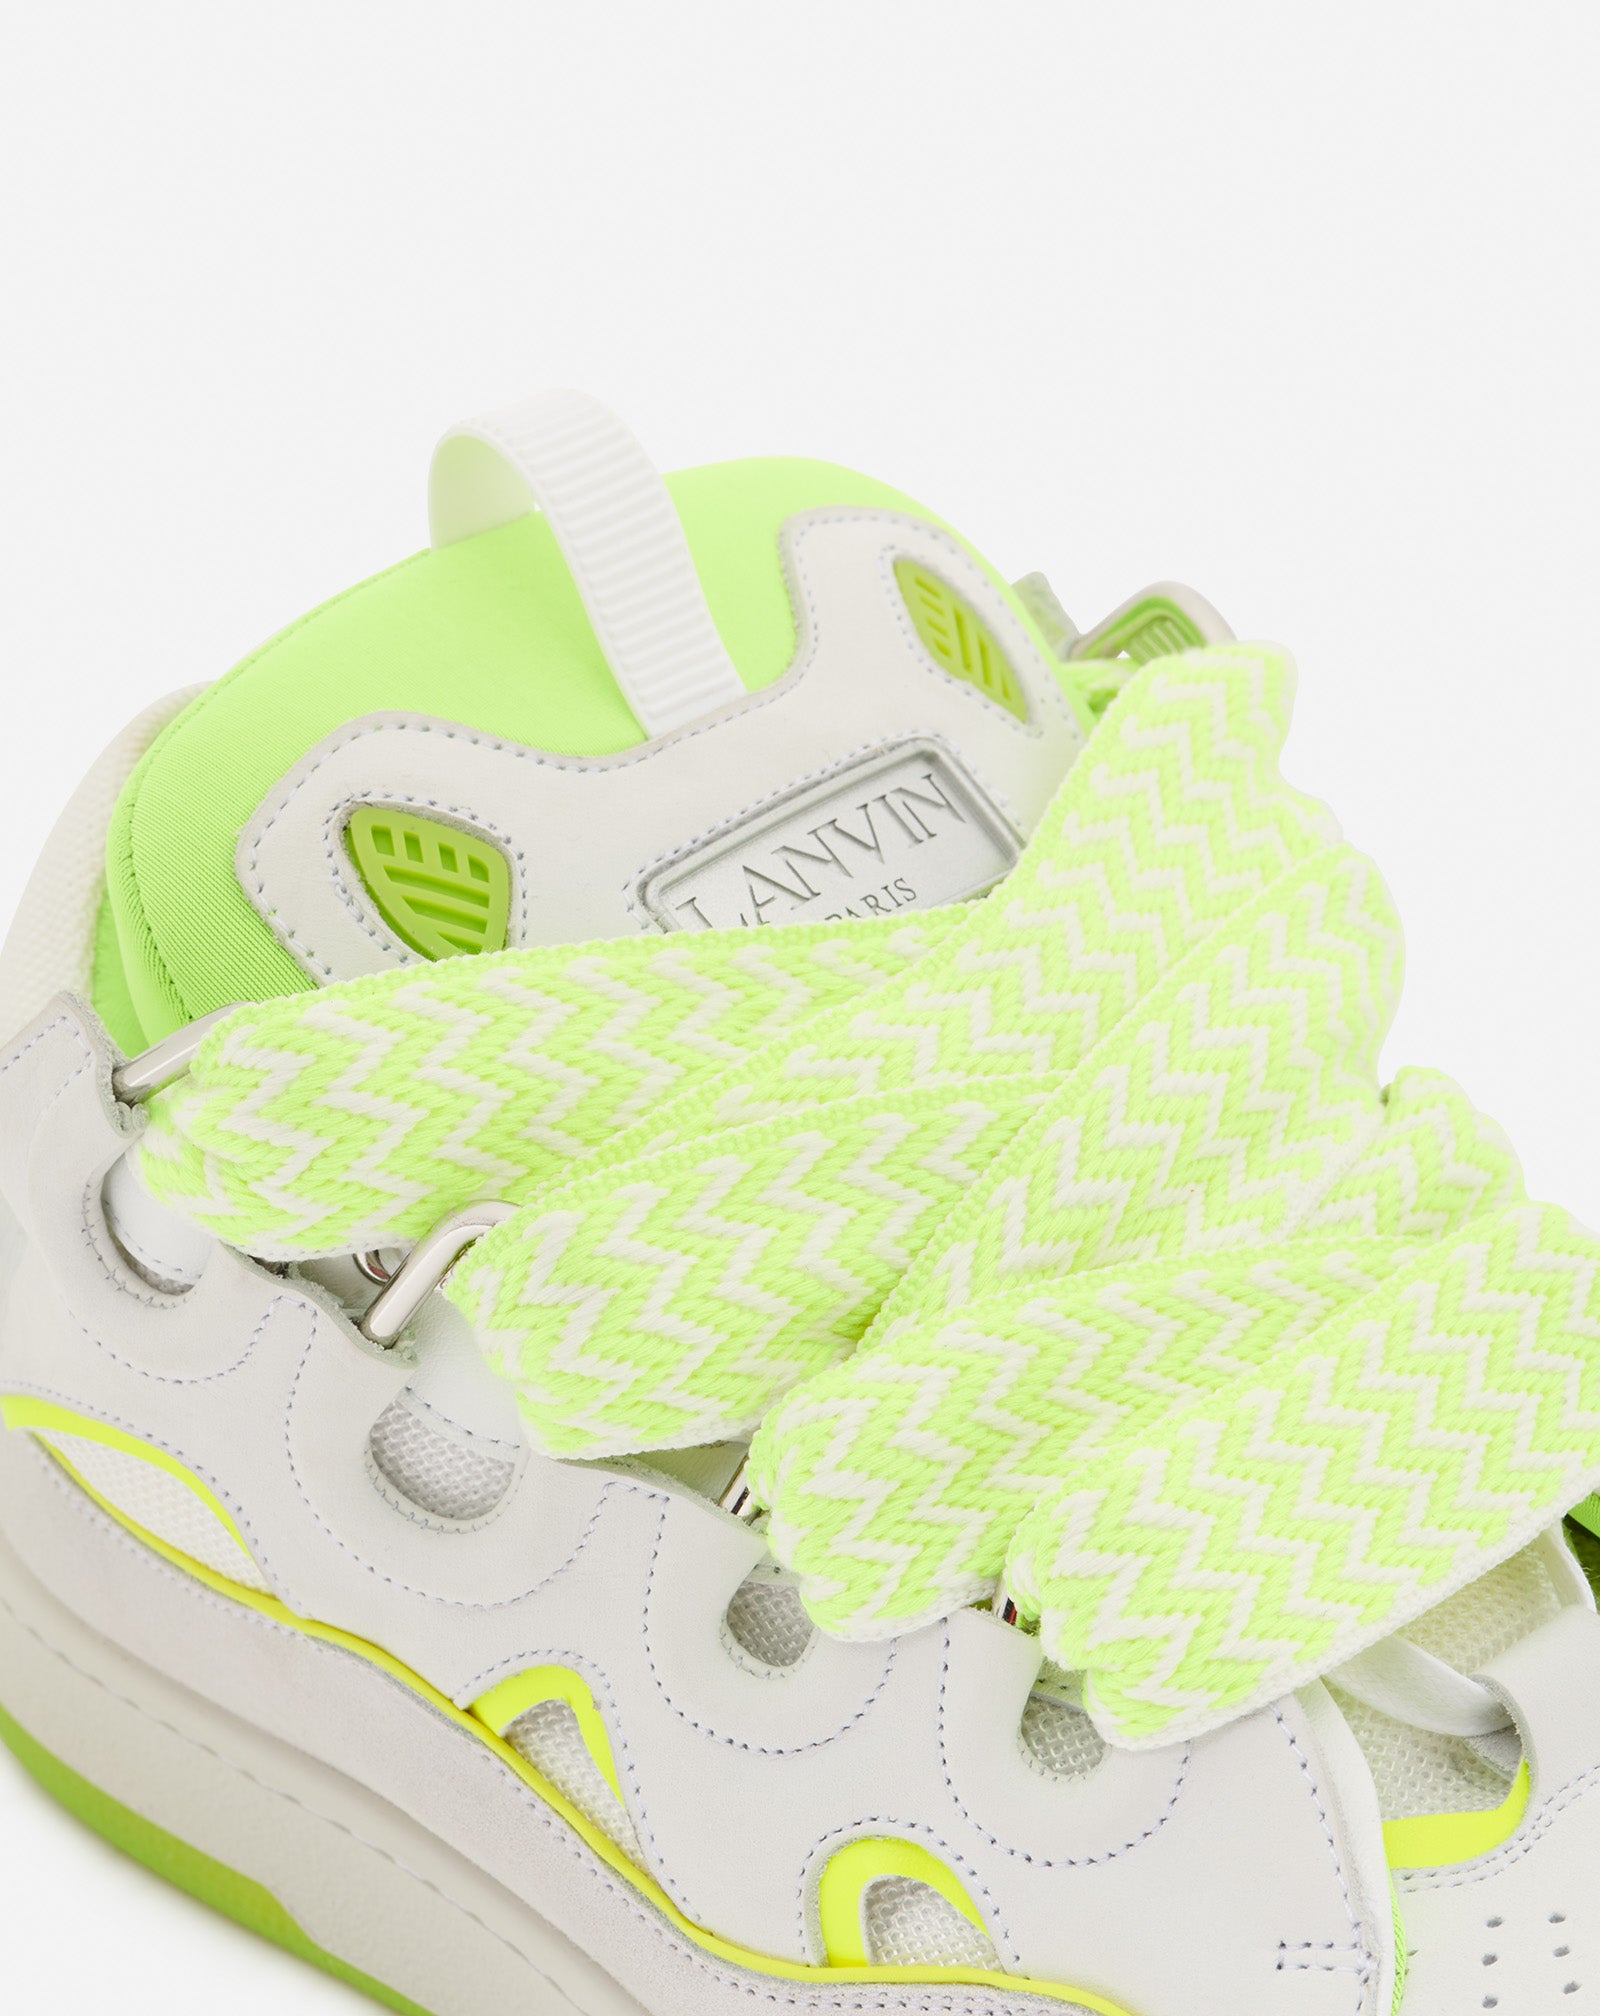 LEATHER CURB SNEAKERS, WHITE/FLUORESCENT YELLOW